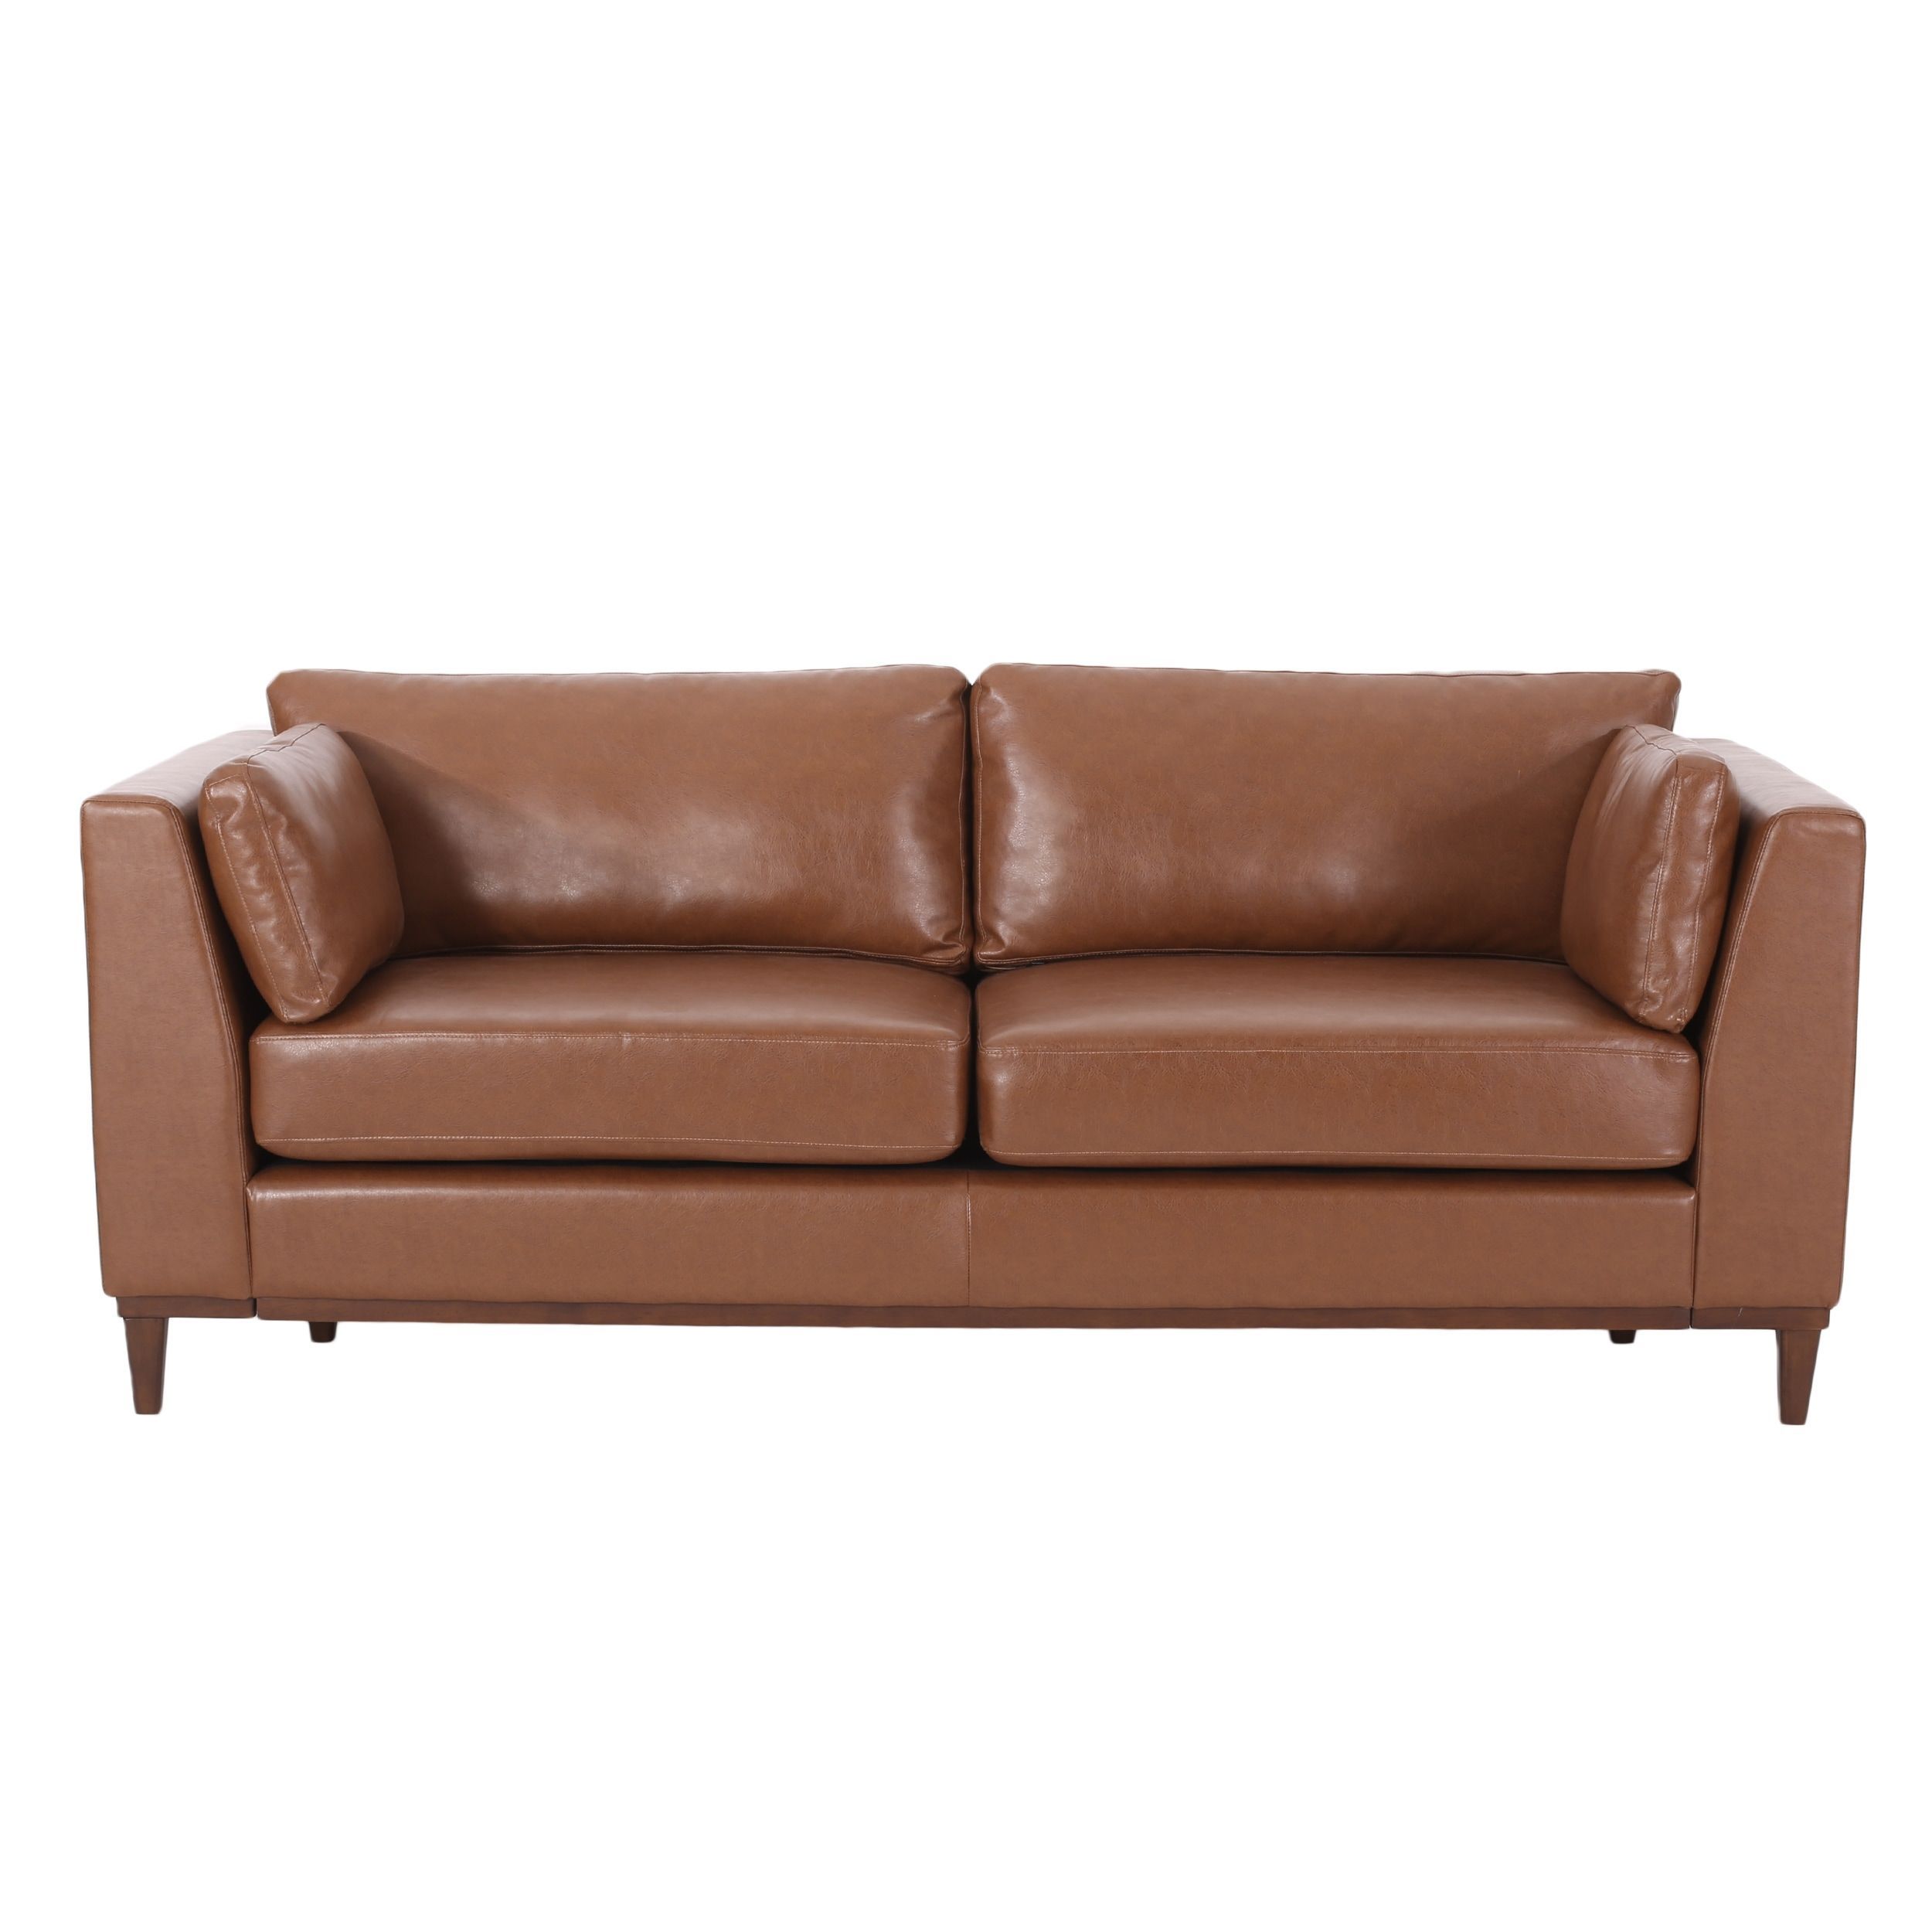 Warbler Faux Leather 3 Seater Sofachristopher Knight Home – On Sale With Traditional 3 Seater Faux Leather Sofas (View 17 of 20)